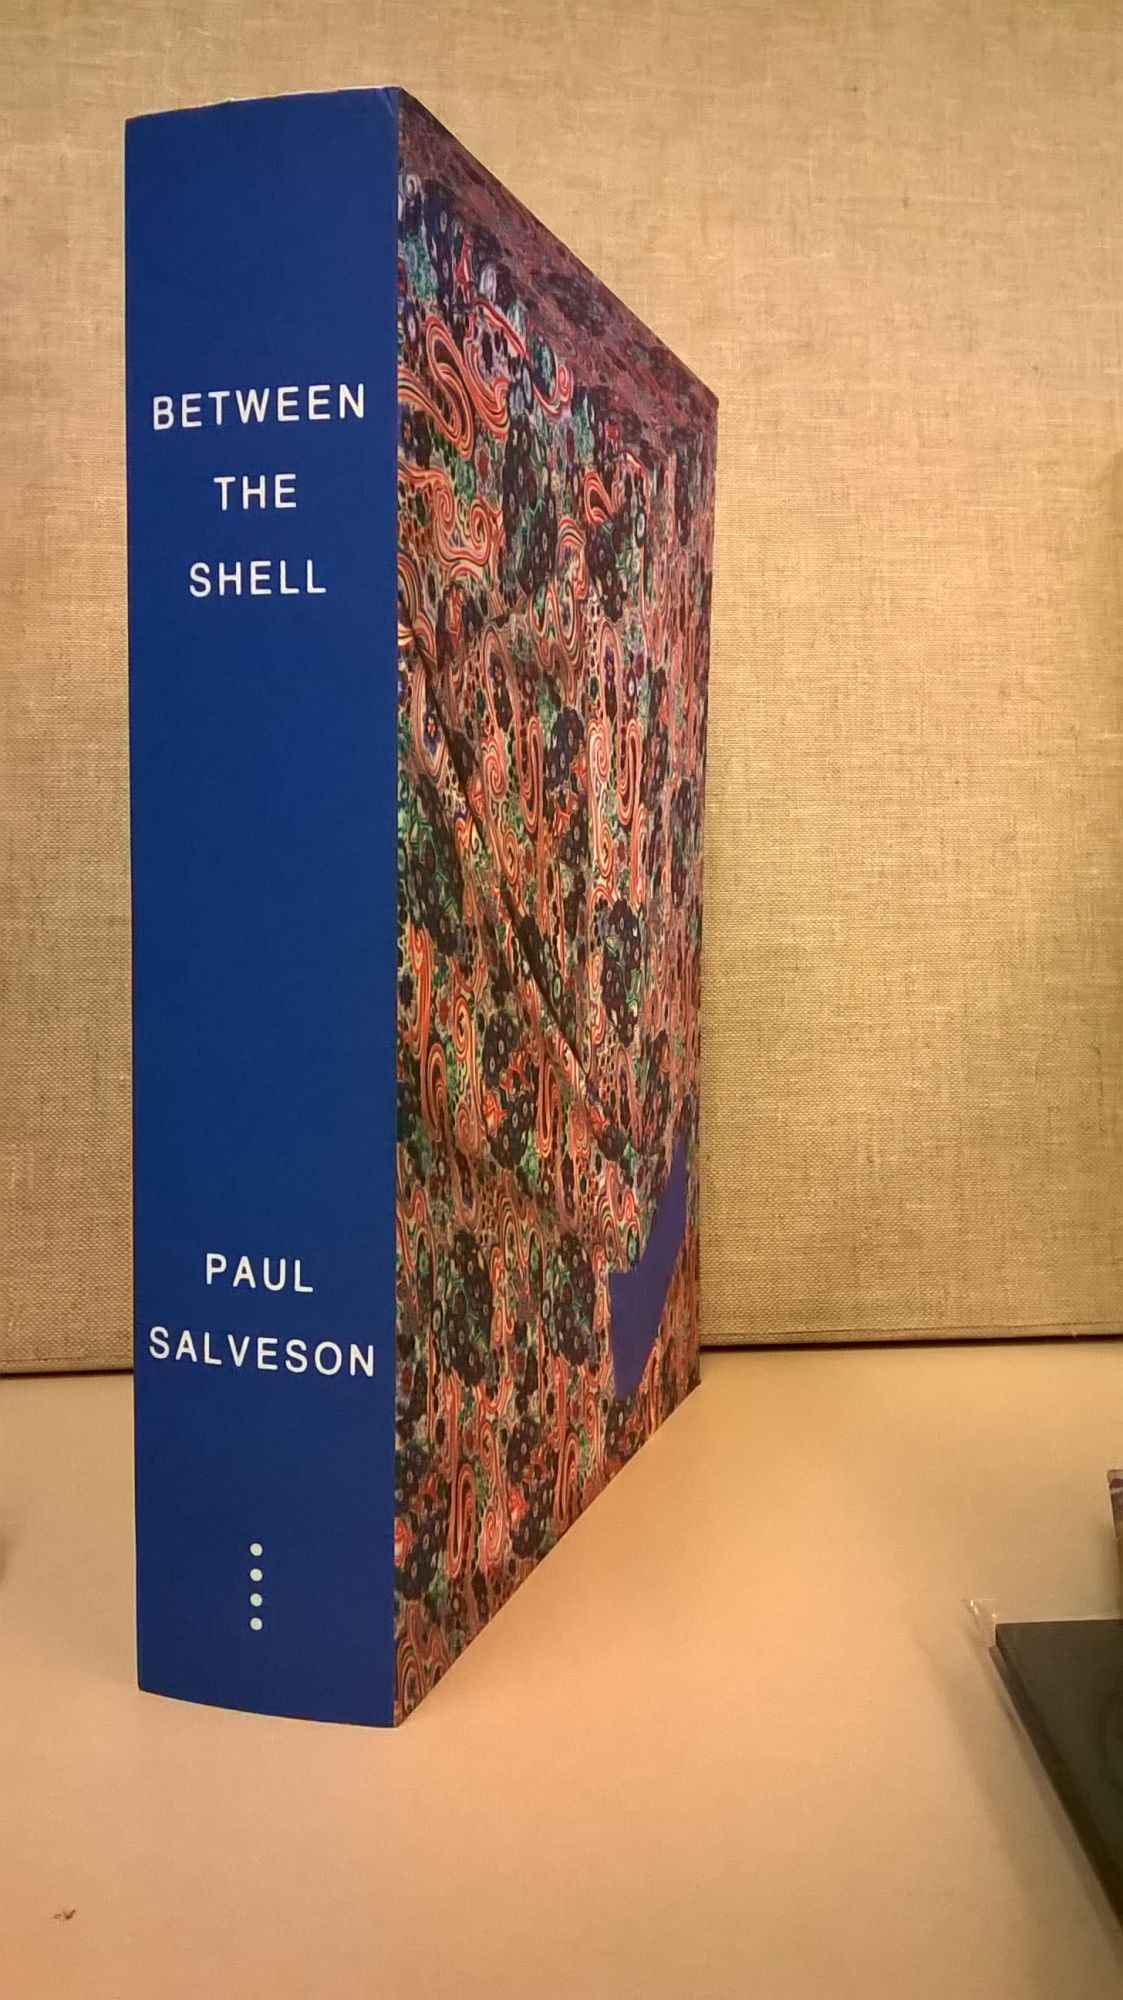 Between the Shell by Paul Salveson on Moe's Books